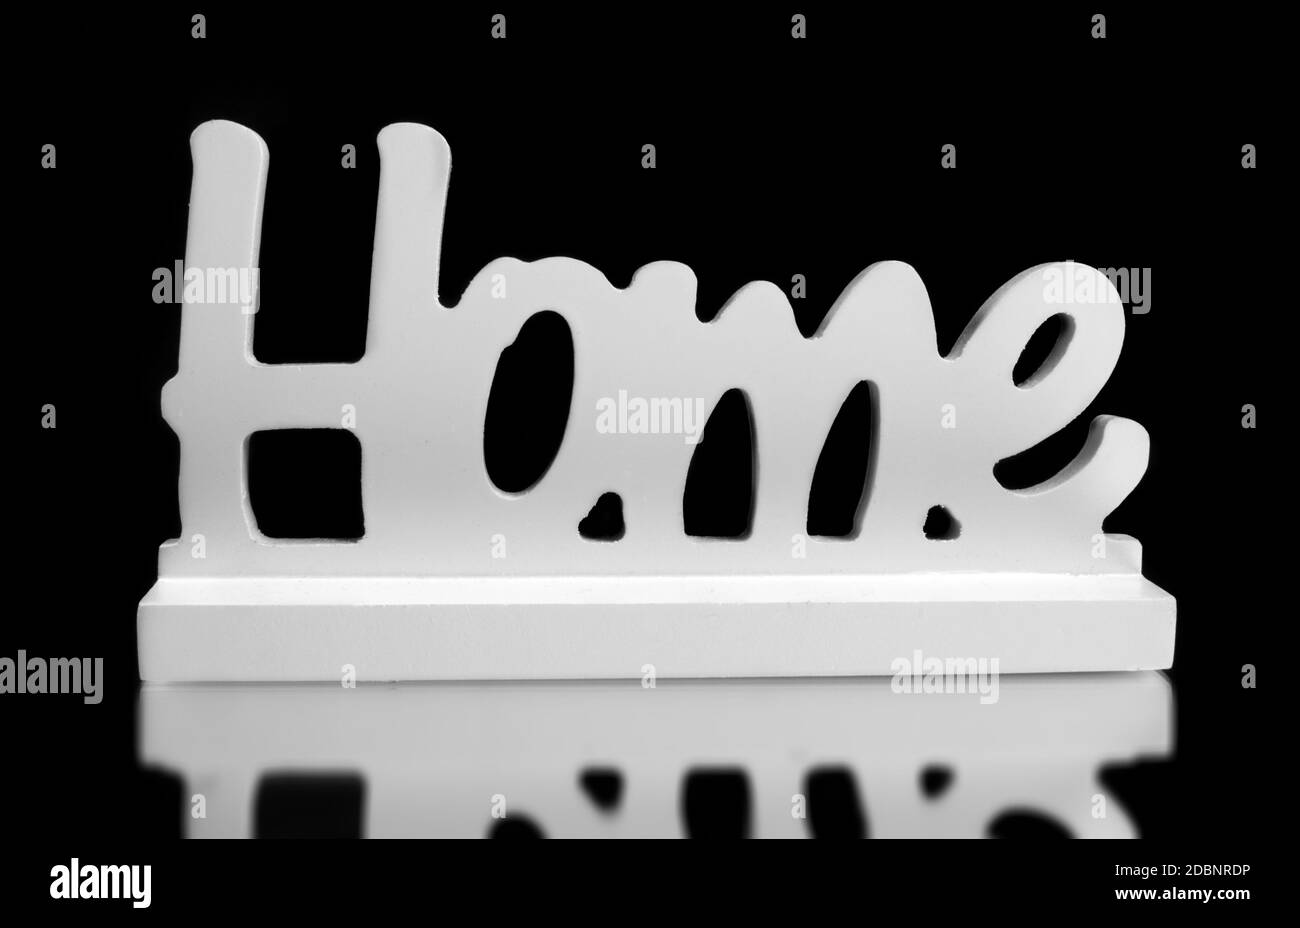 home sign on the black surface Stock Photo